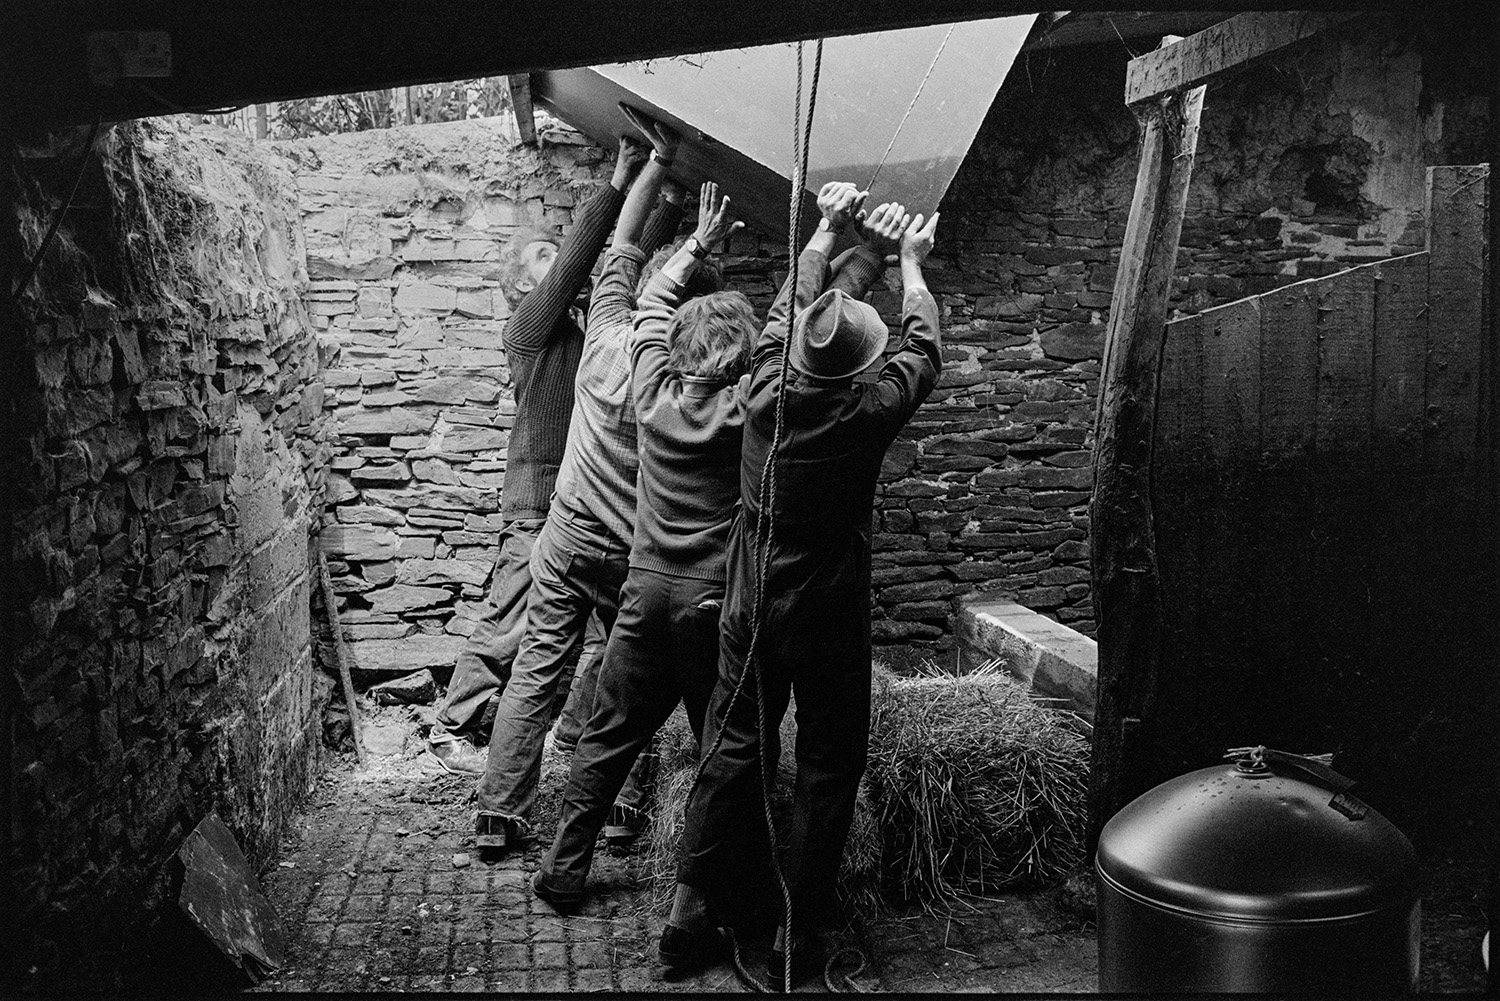 Men heaving large oil tank into shed. 
[Four men lowering a large oil tank into a stone barn at Woolridge, Dolton. They are lowering it onto hay bales.]